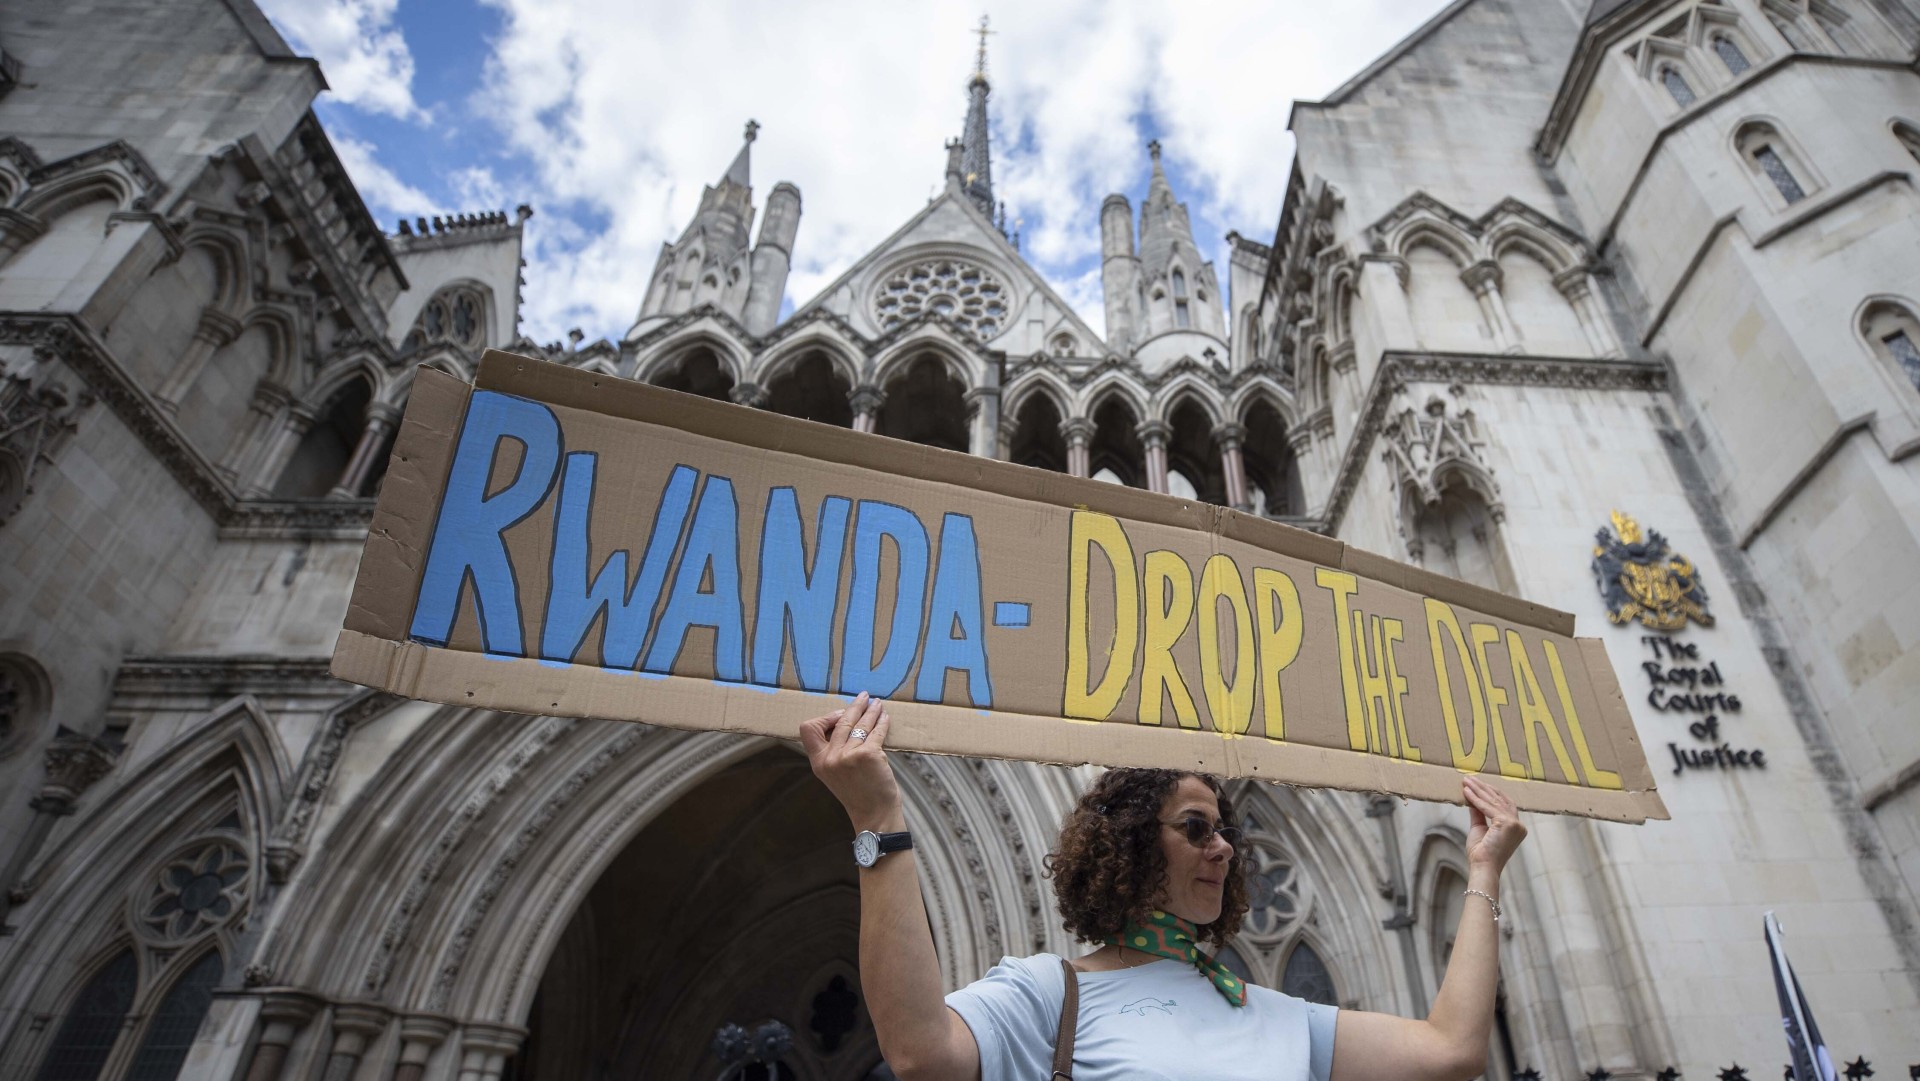 A protester demonstrates against the Home Office’s Rwanda plan